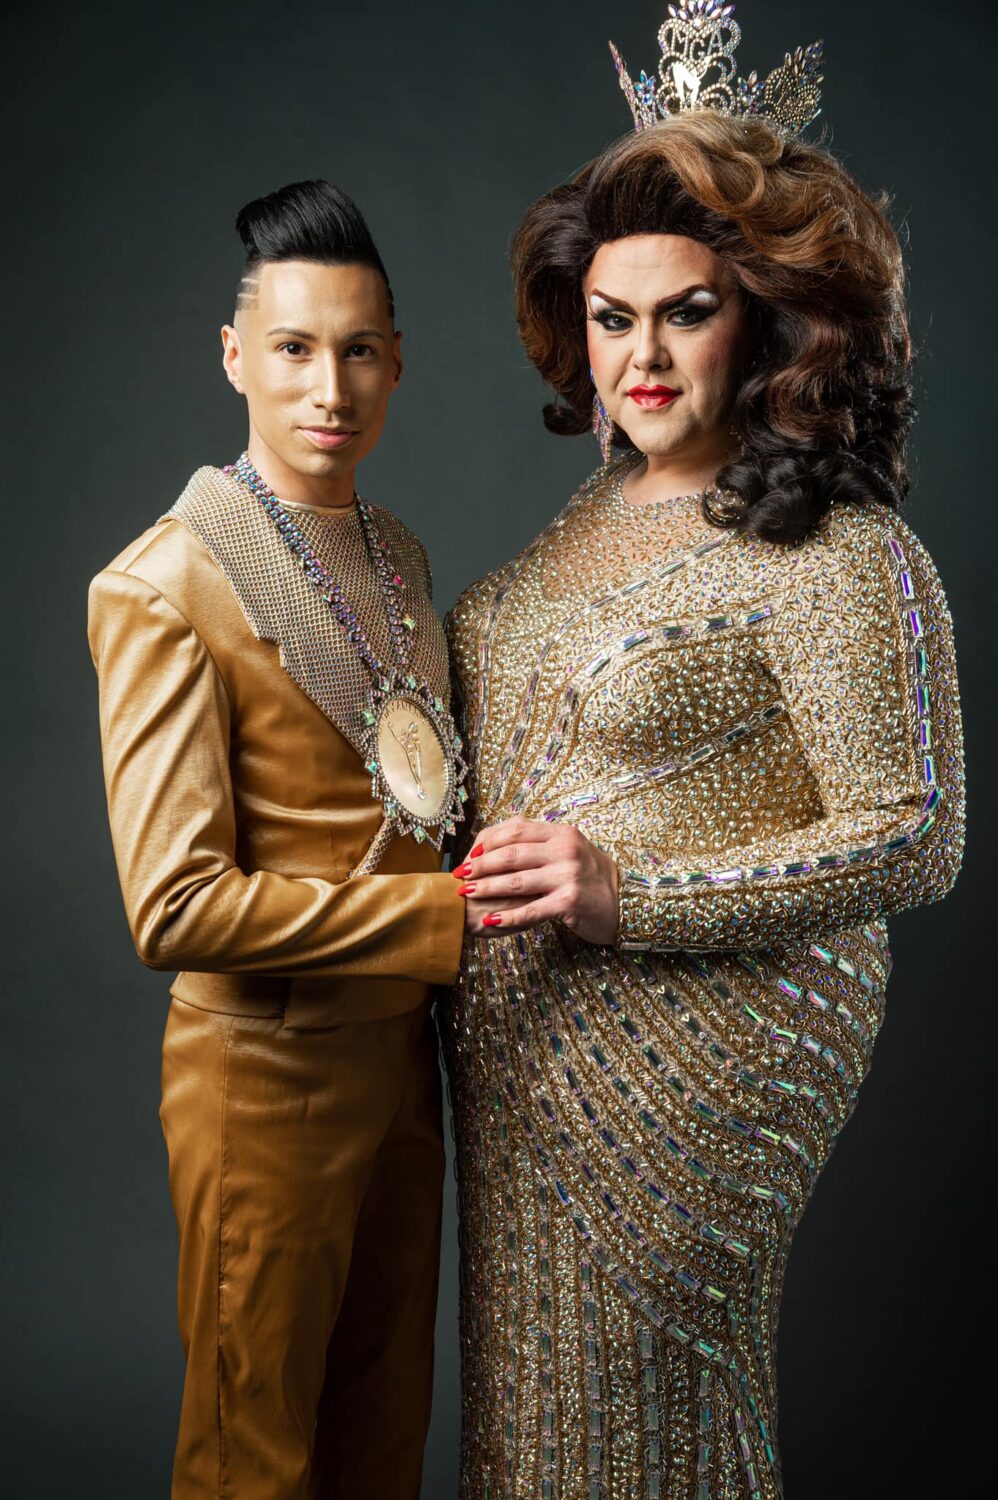 KC Sunshine and Dextaci | 2022 Promotional Photo of Mr. and Miss Gay America